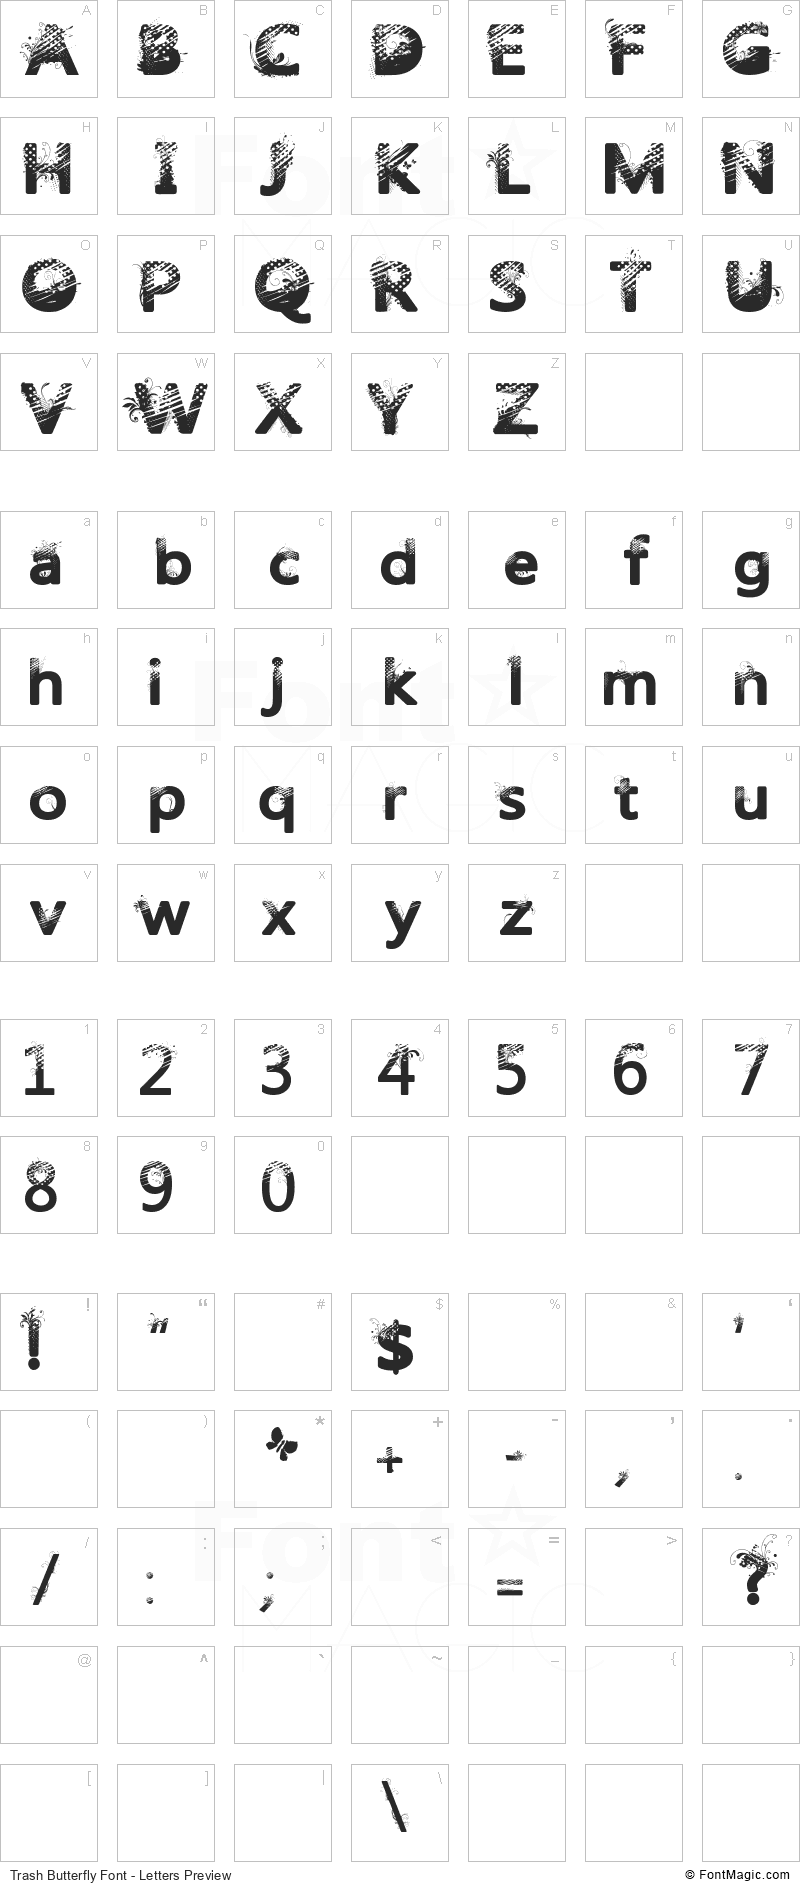 Trash Butterfly Font - All Latters Preview Chart